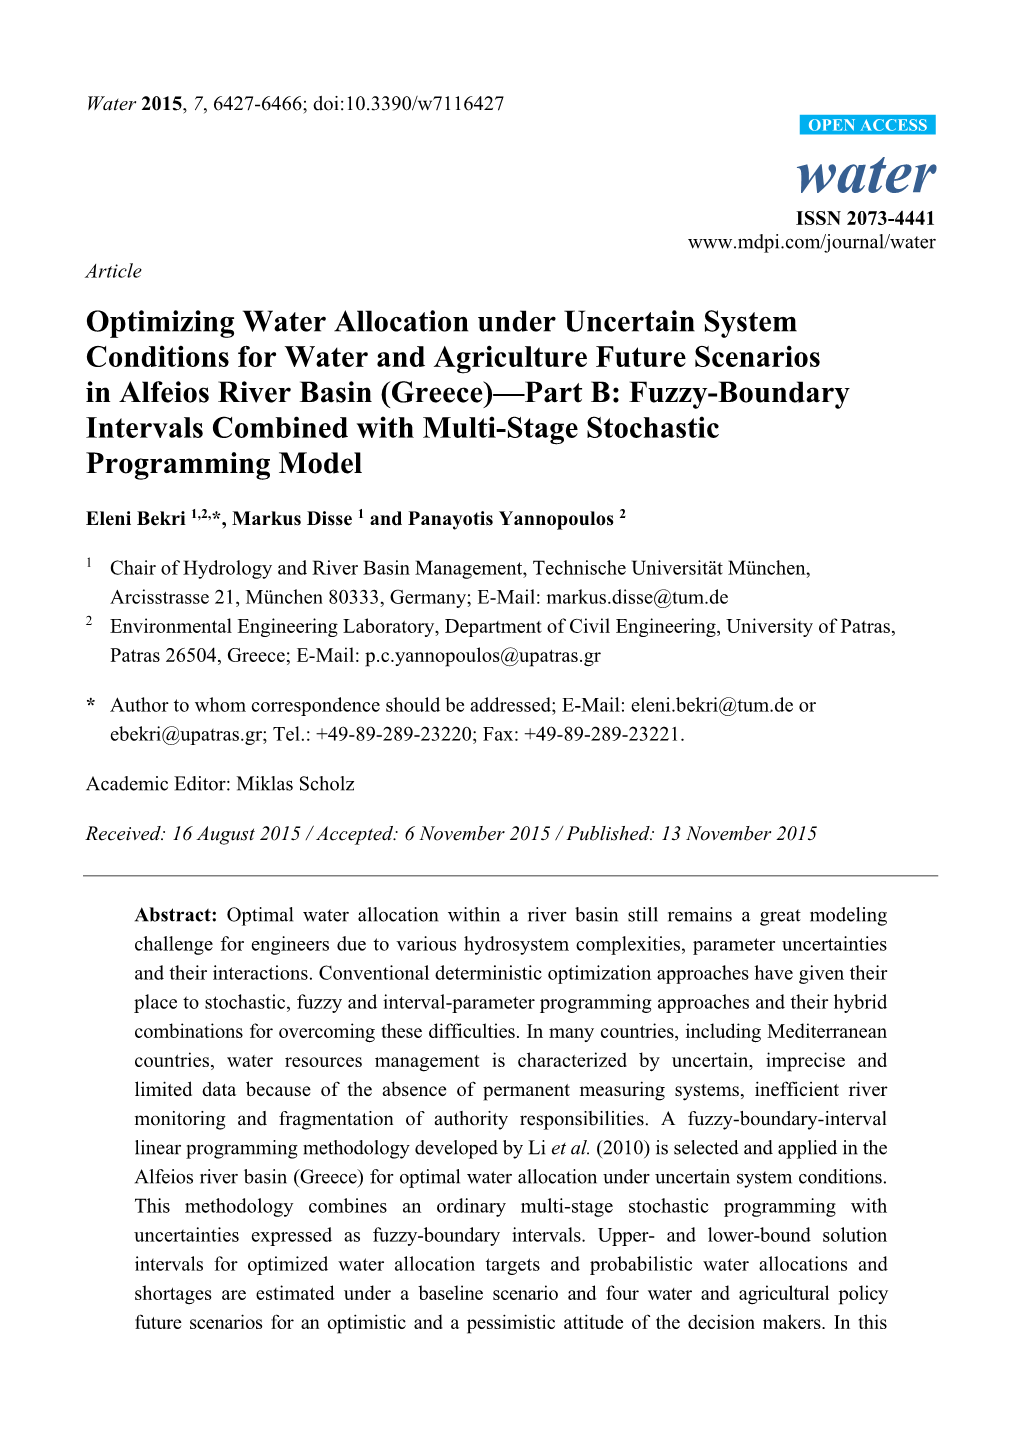 Optimizing Water Allocation Under Uncertain System Conditions For